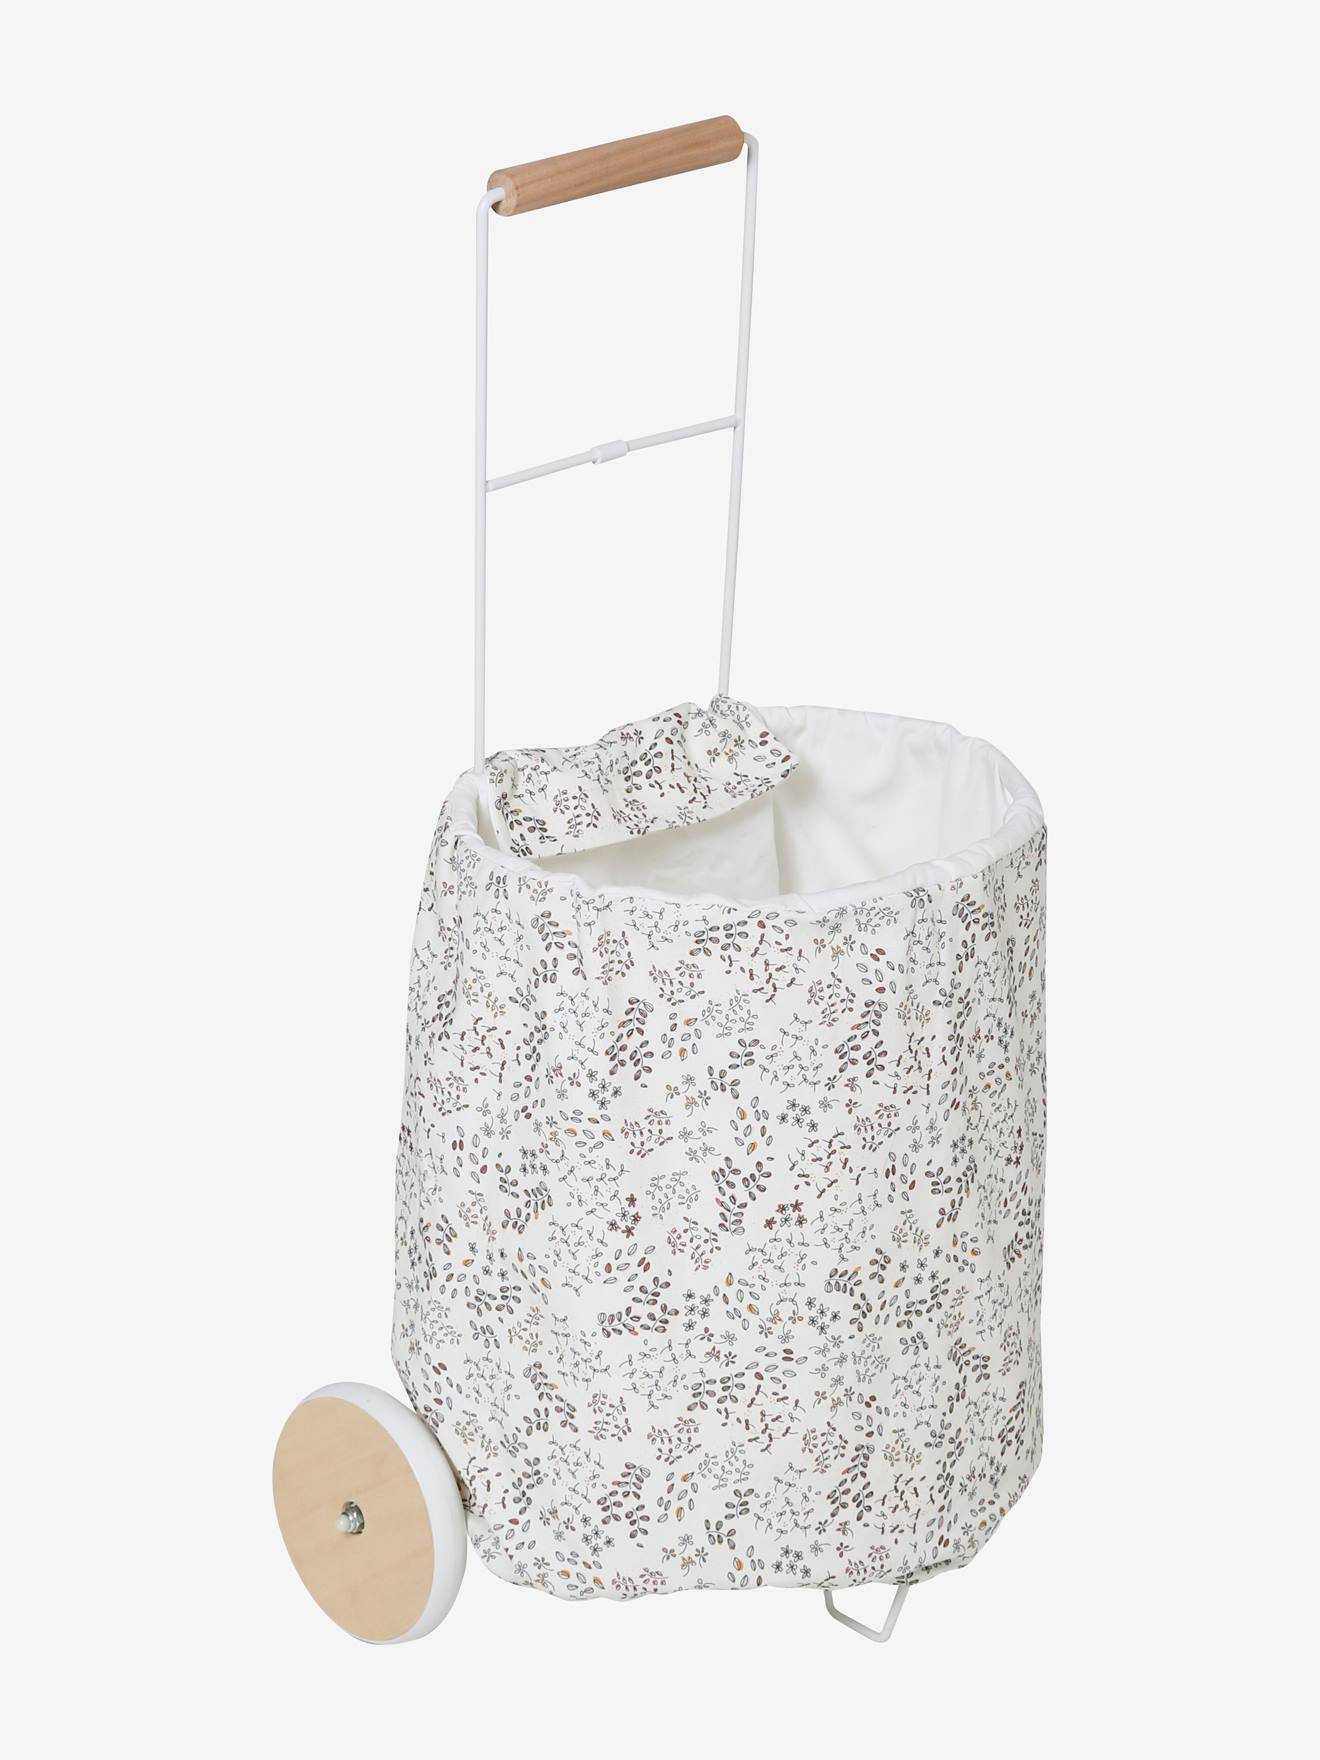 Shopping Basket on Wheels, Metal & Fabric grey light solid with design